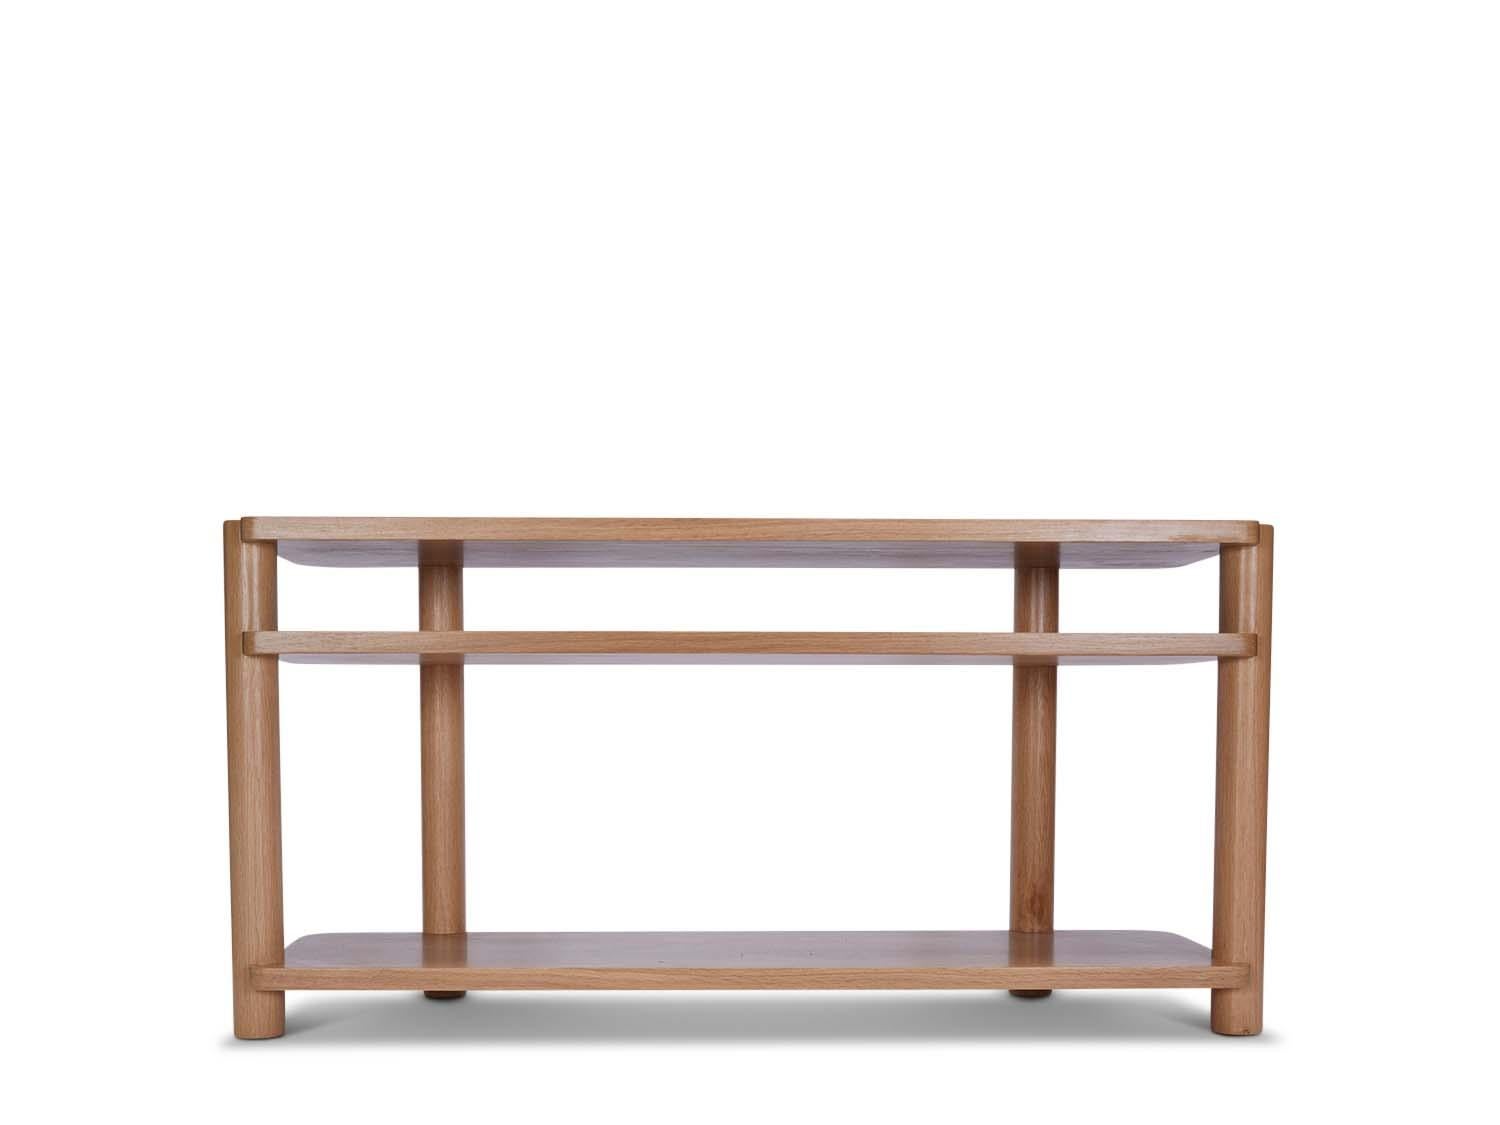 The Jalama Console pairs sturdy hardwood dowels with cascading selves that play with various soft corners.

The Lawson-Fenning Collection is designed and handmade in Los Angeles, California. Reach out to discover what options are currently in stock.